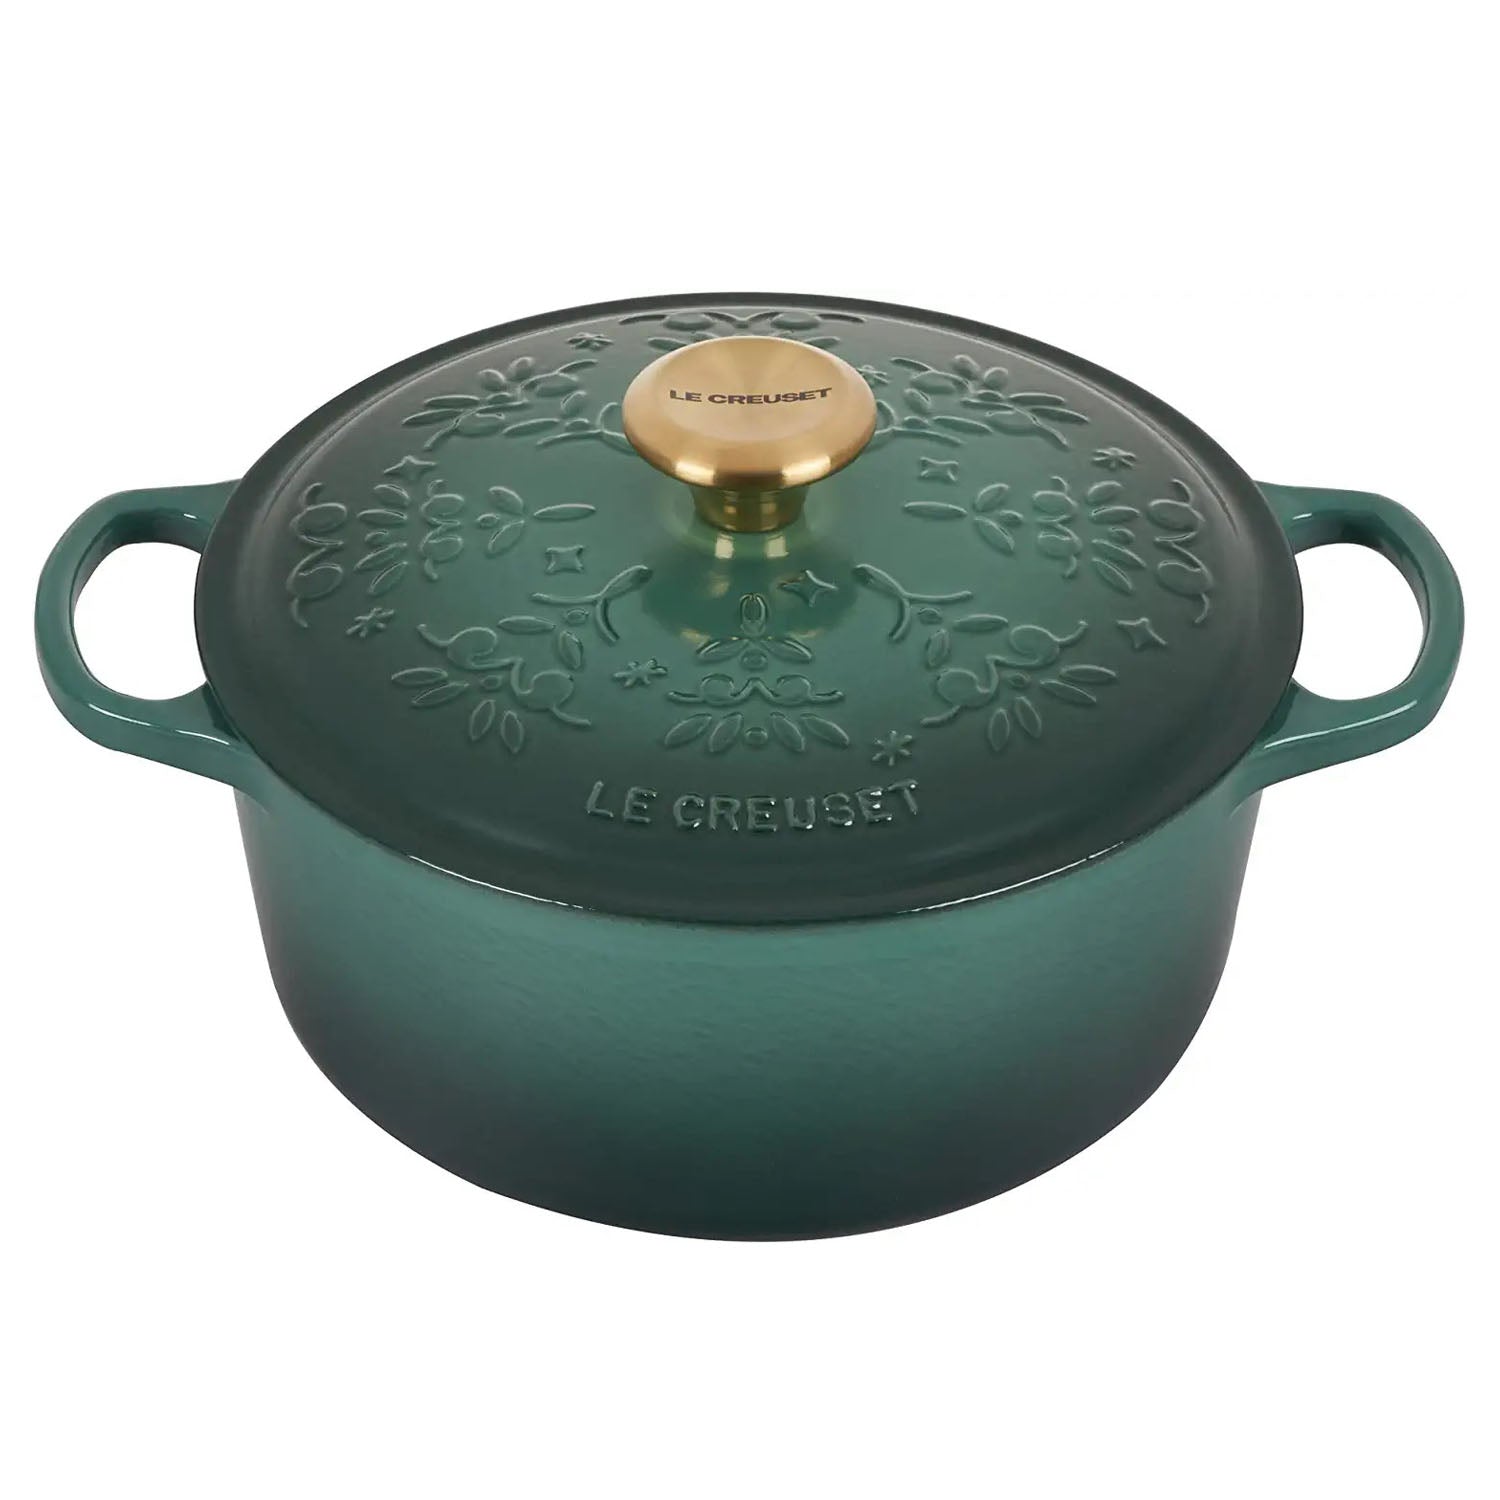 Le Creuset 4.5 qt Oval Dutch Oven w/Grill Pan Lid & Accessories on